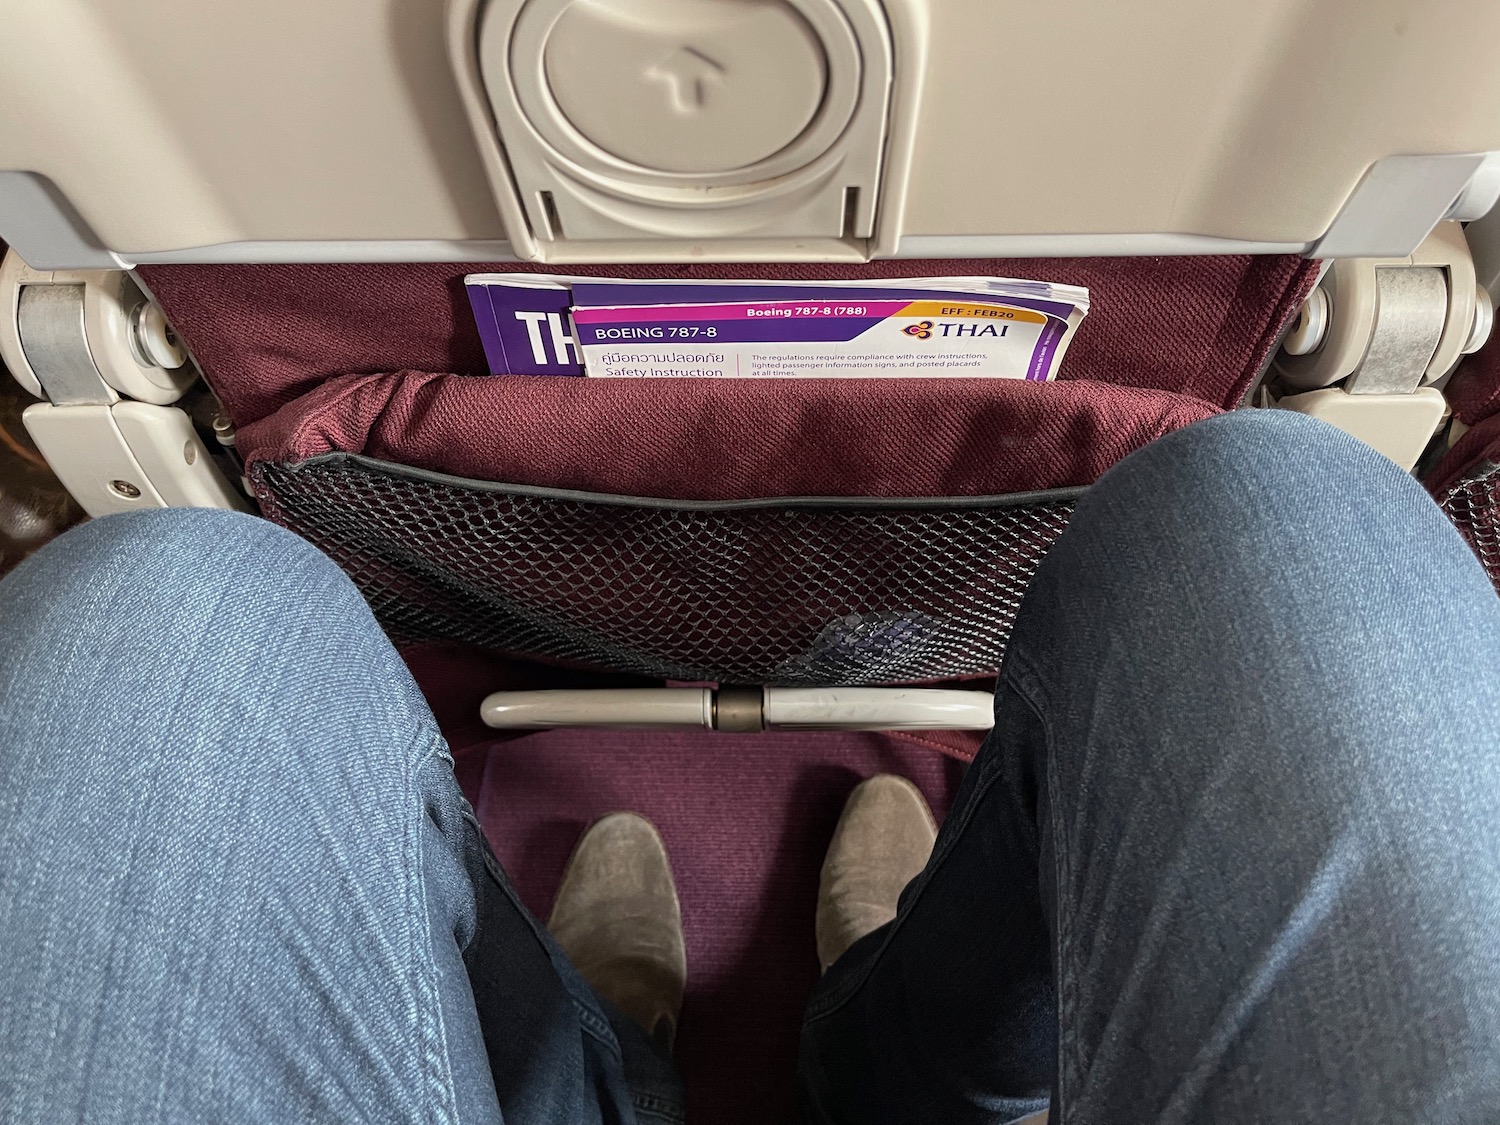 a person's legs in a seat with a pocket in the back